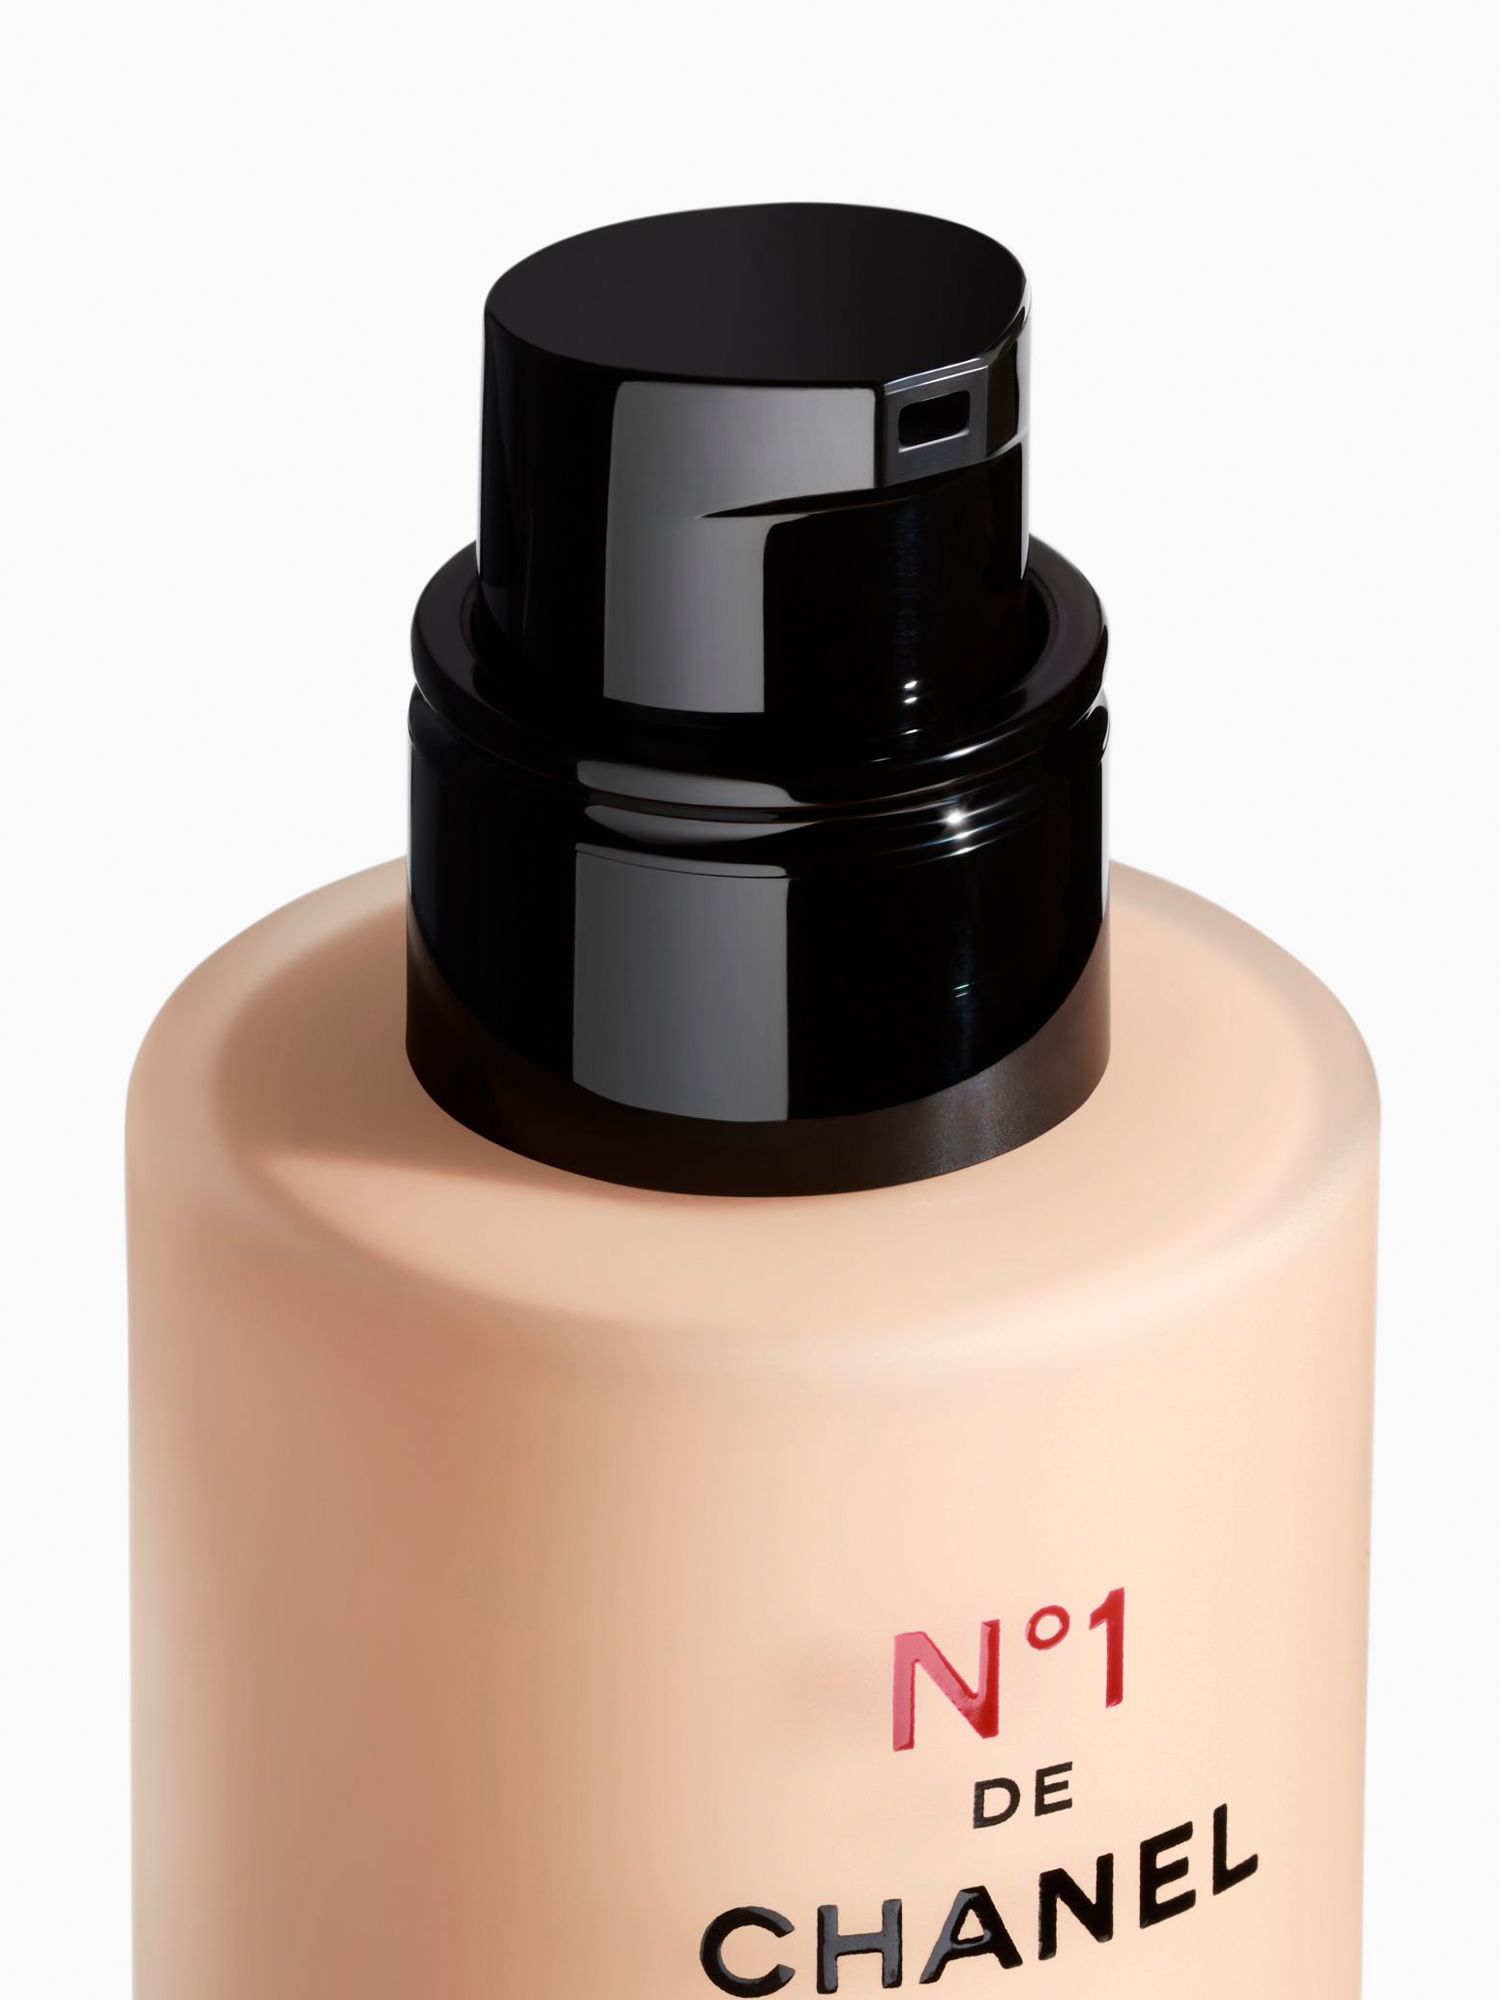 CHANEL N°1 De CHANEL Revitalising Foundation Illuminates - Hydrates -  Protects, BR12 at John Lewis & Partners